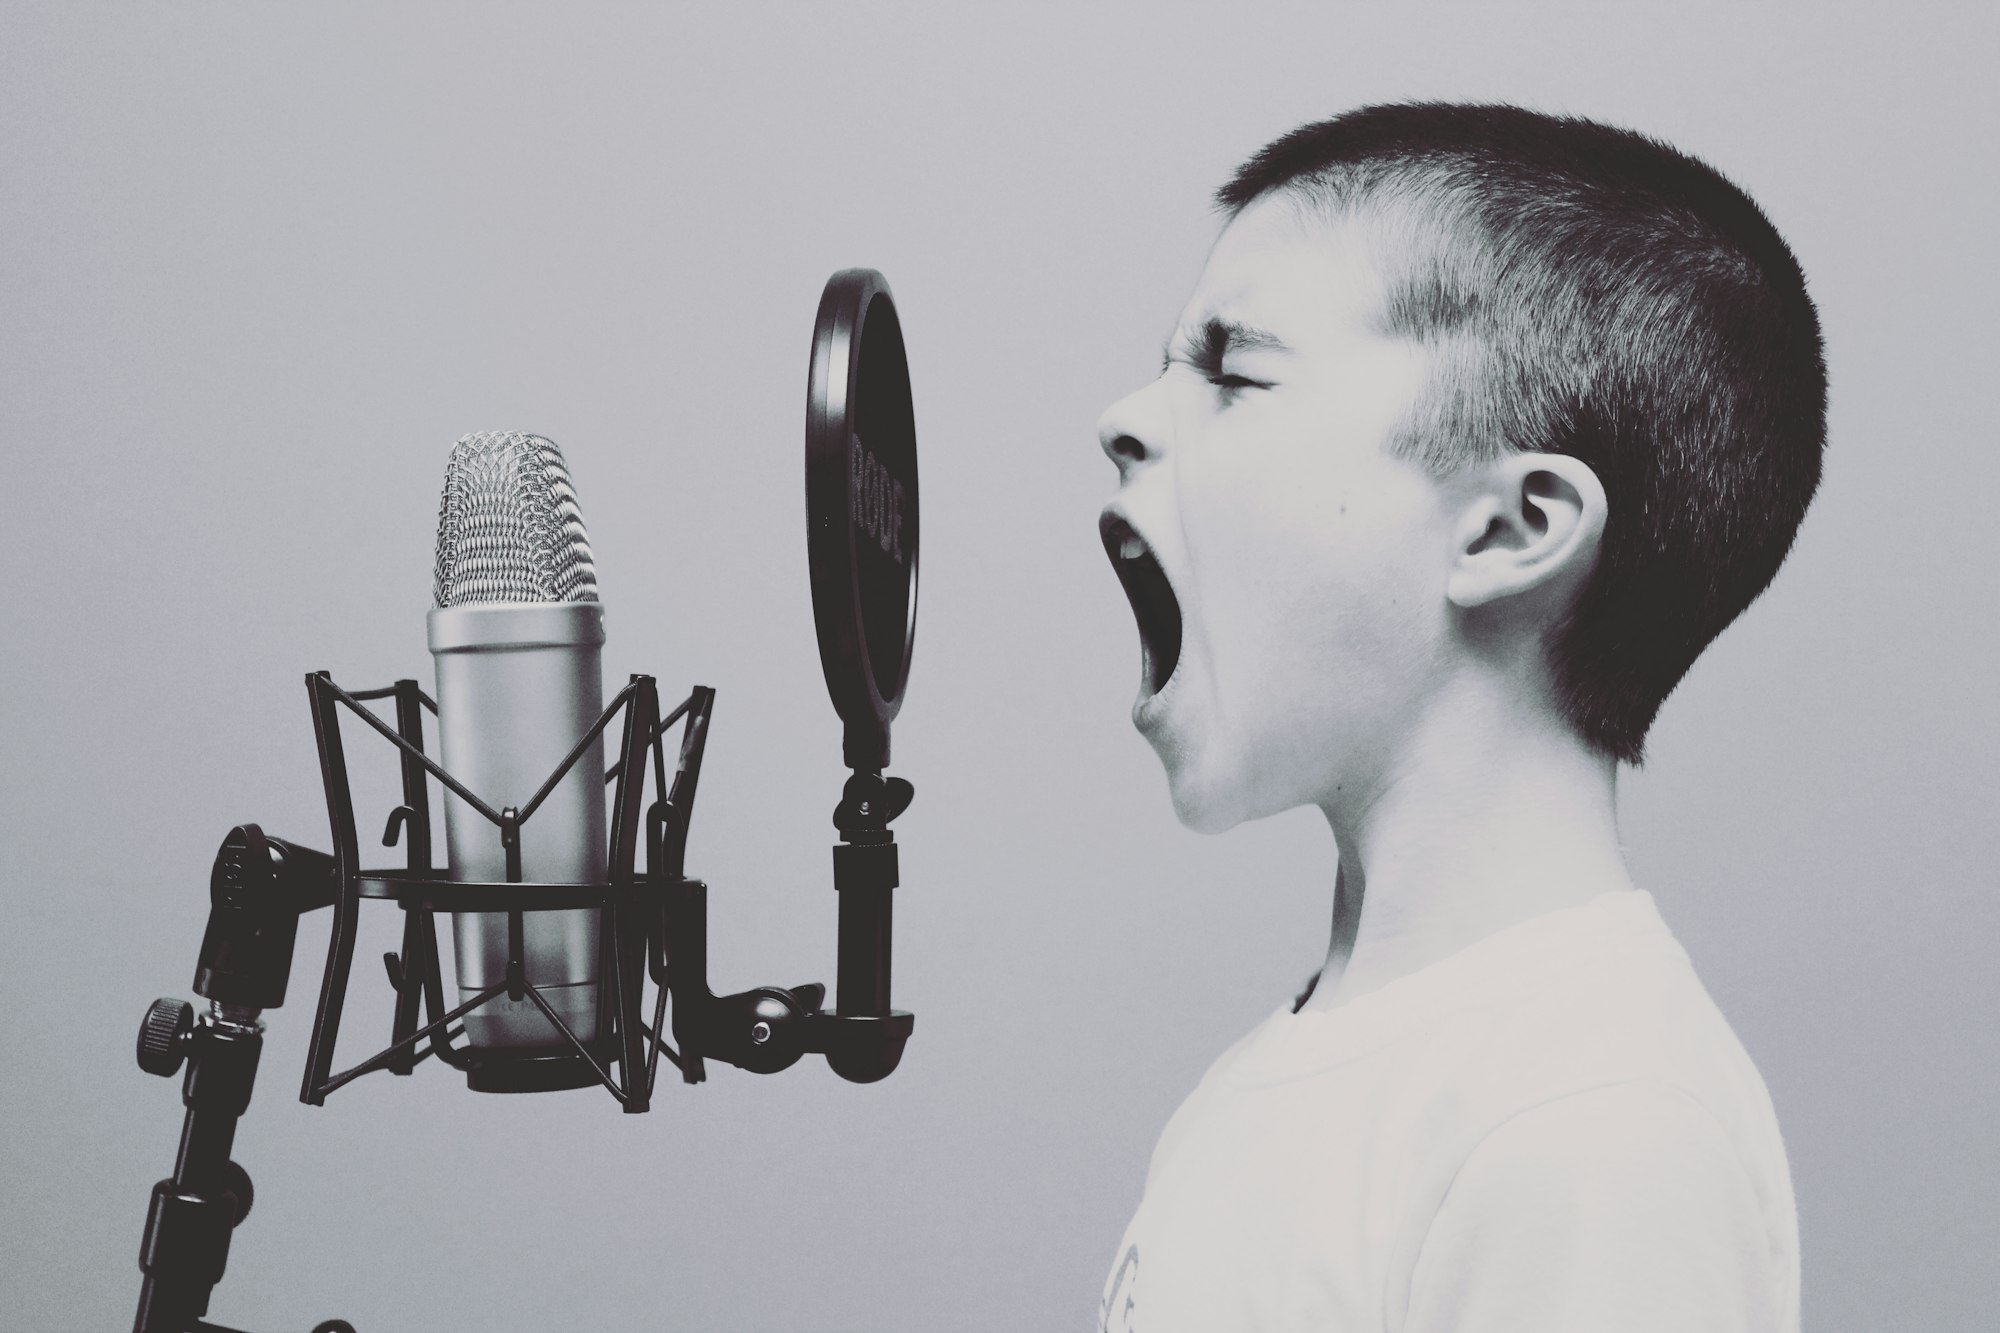 A kid yelling into a microphone, sure to produce feedback